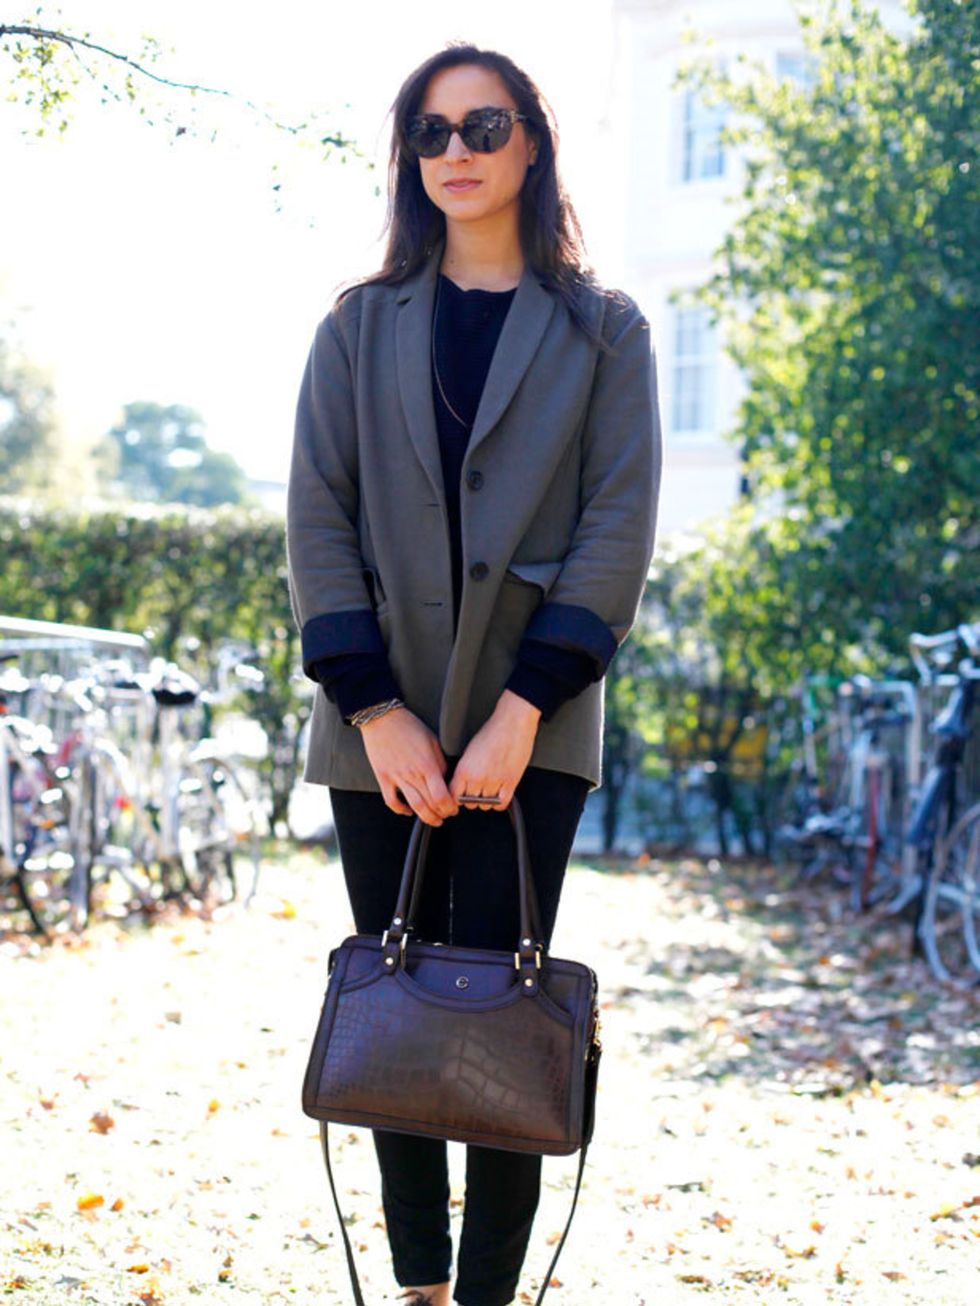 <p>Photo by Silvia Olsen @ Anthea SimmsEmilia Loukas, 23, PR. Jacket from Vancouver, vintage top, bag and shoes, Gap trousers.</p>